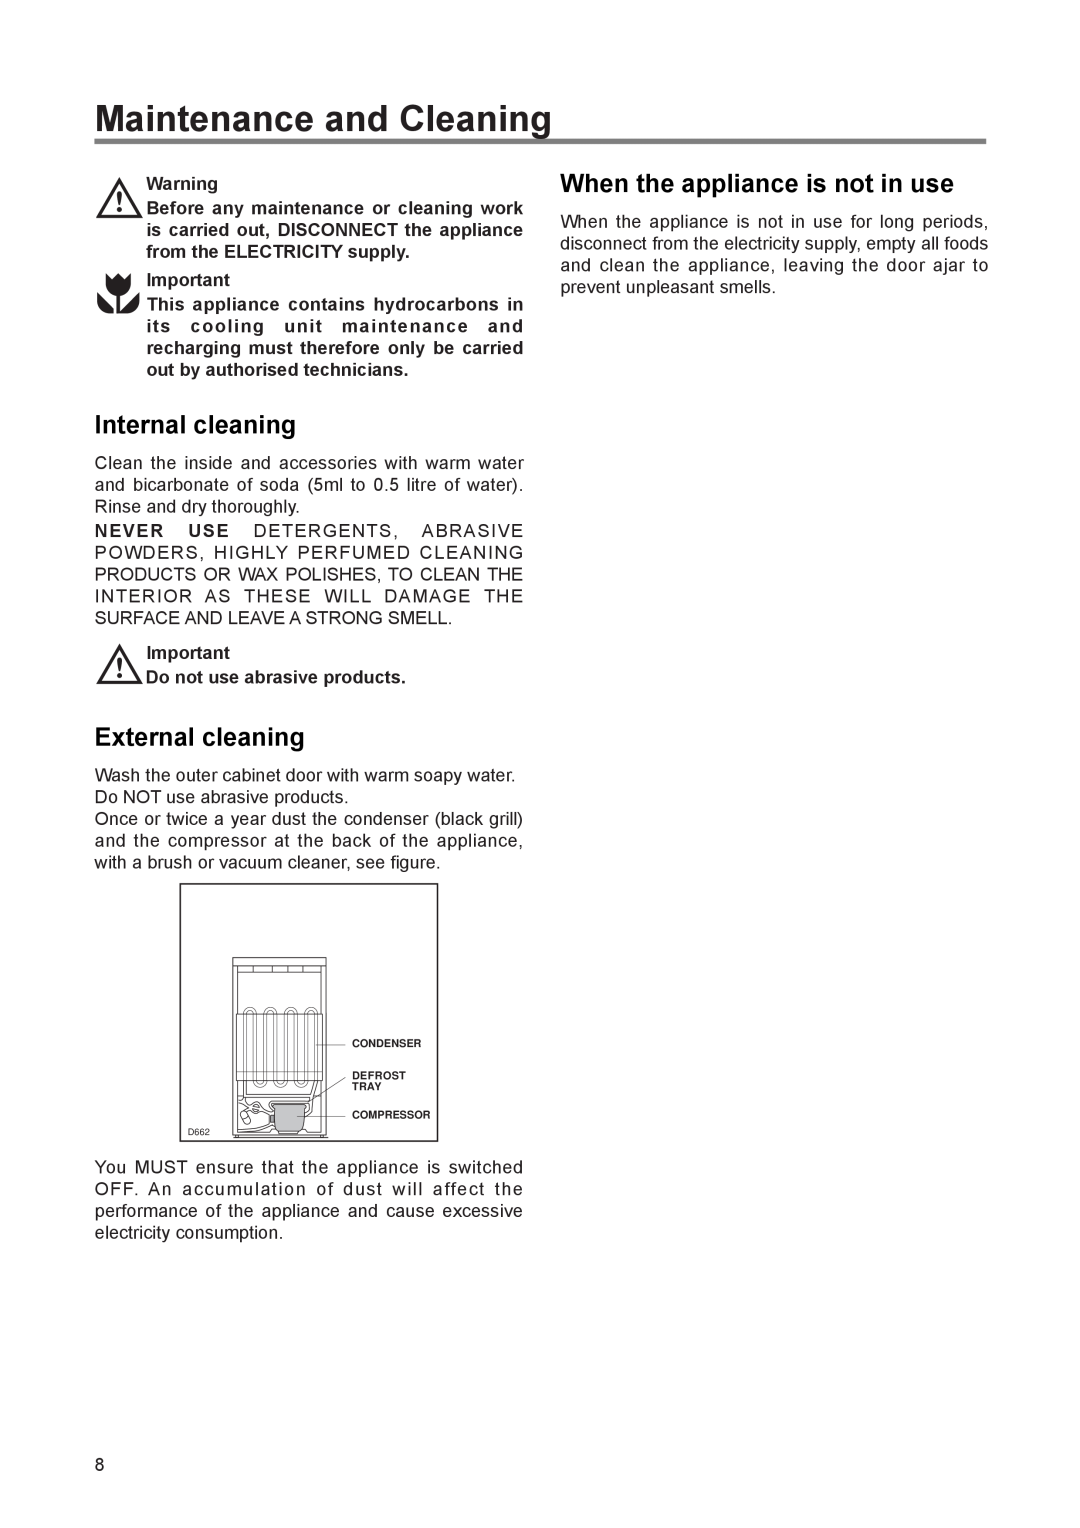 Zanussi ZUF 65 W 1 manual Maintenance and Cleaning, Internal cleaning, External cleaning, When the appliance is not in use 